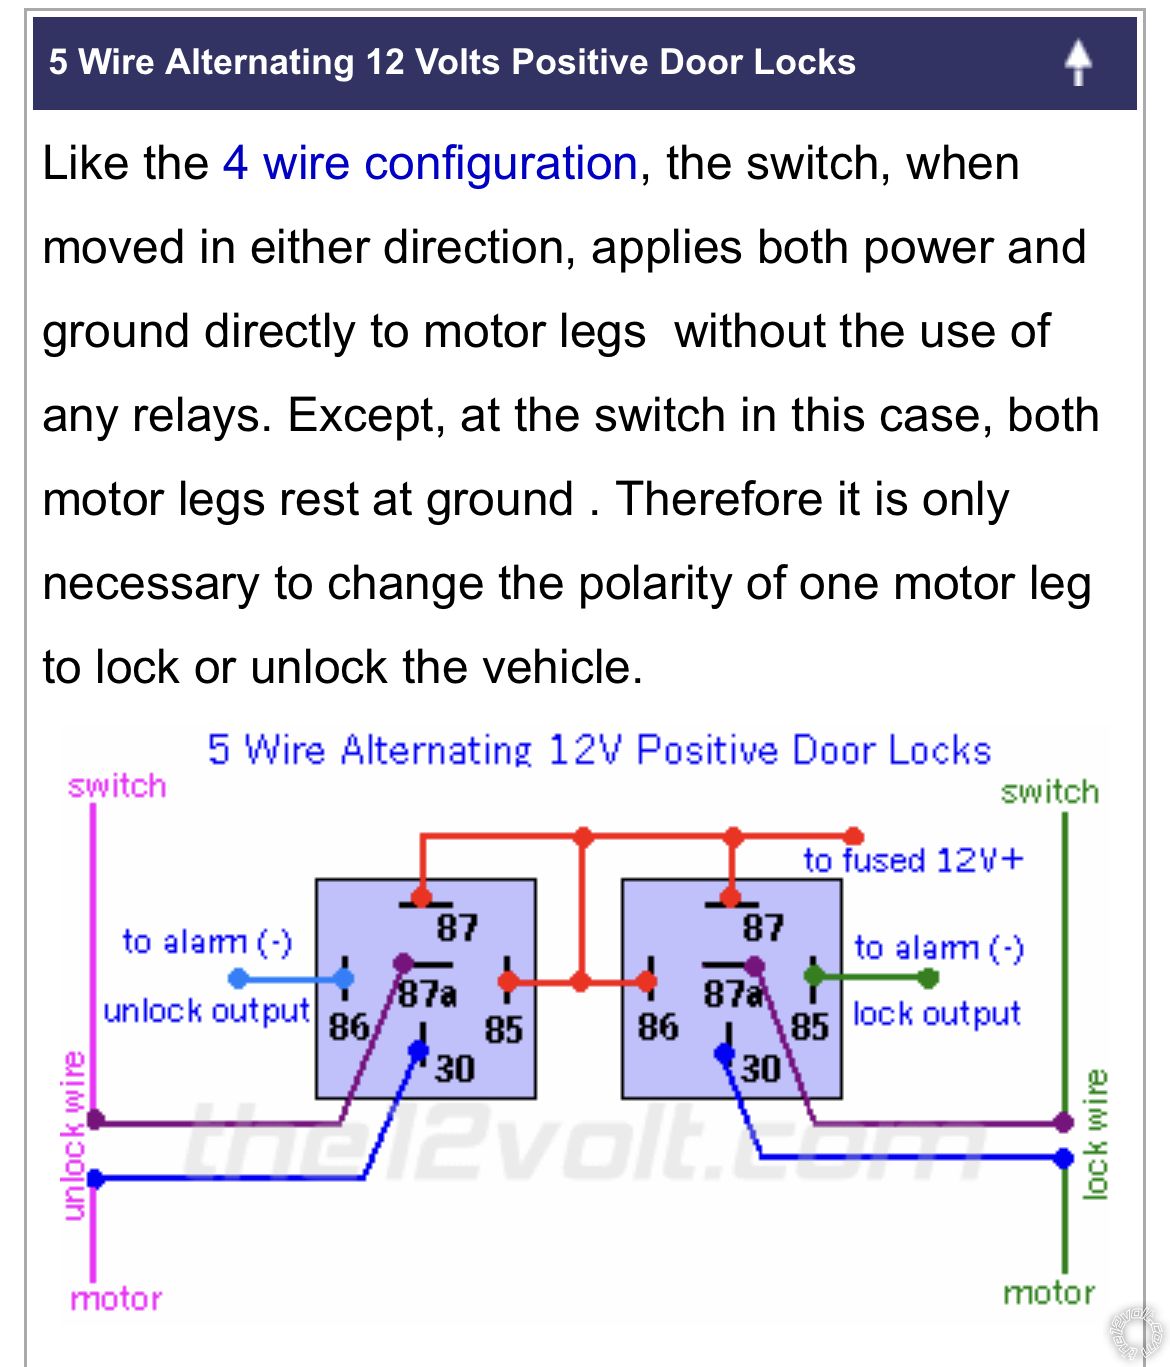 Where On Door Lock Switch Does The 87a Switch Wire Connect? -- posted image.